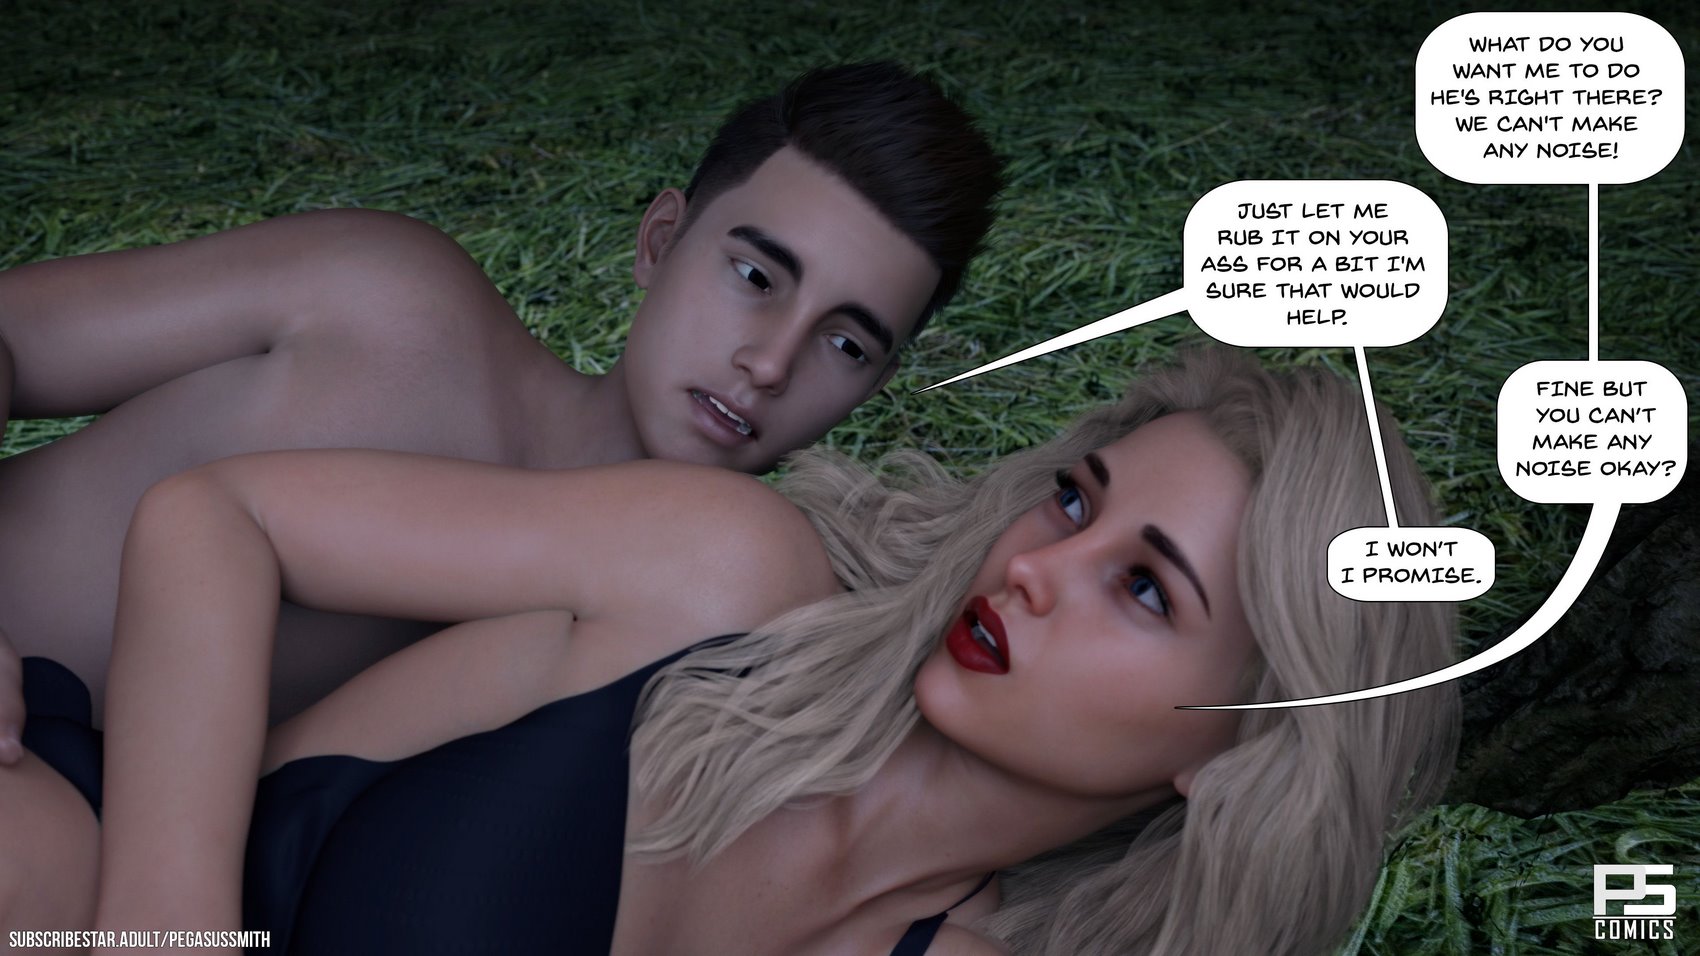 Lost In The Woods [3d] Chapter 2 [pegasus Smith] ⋆ Xxx Toons Porn